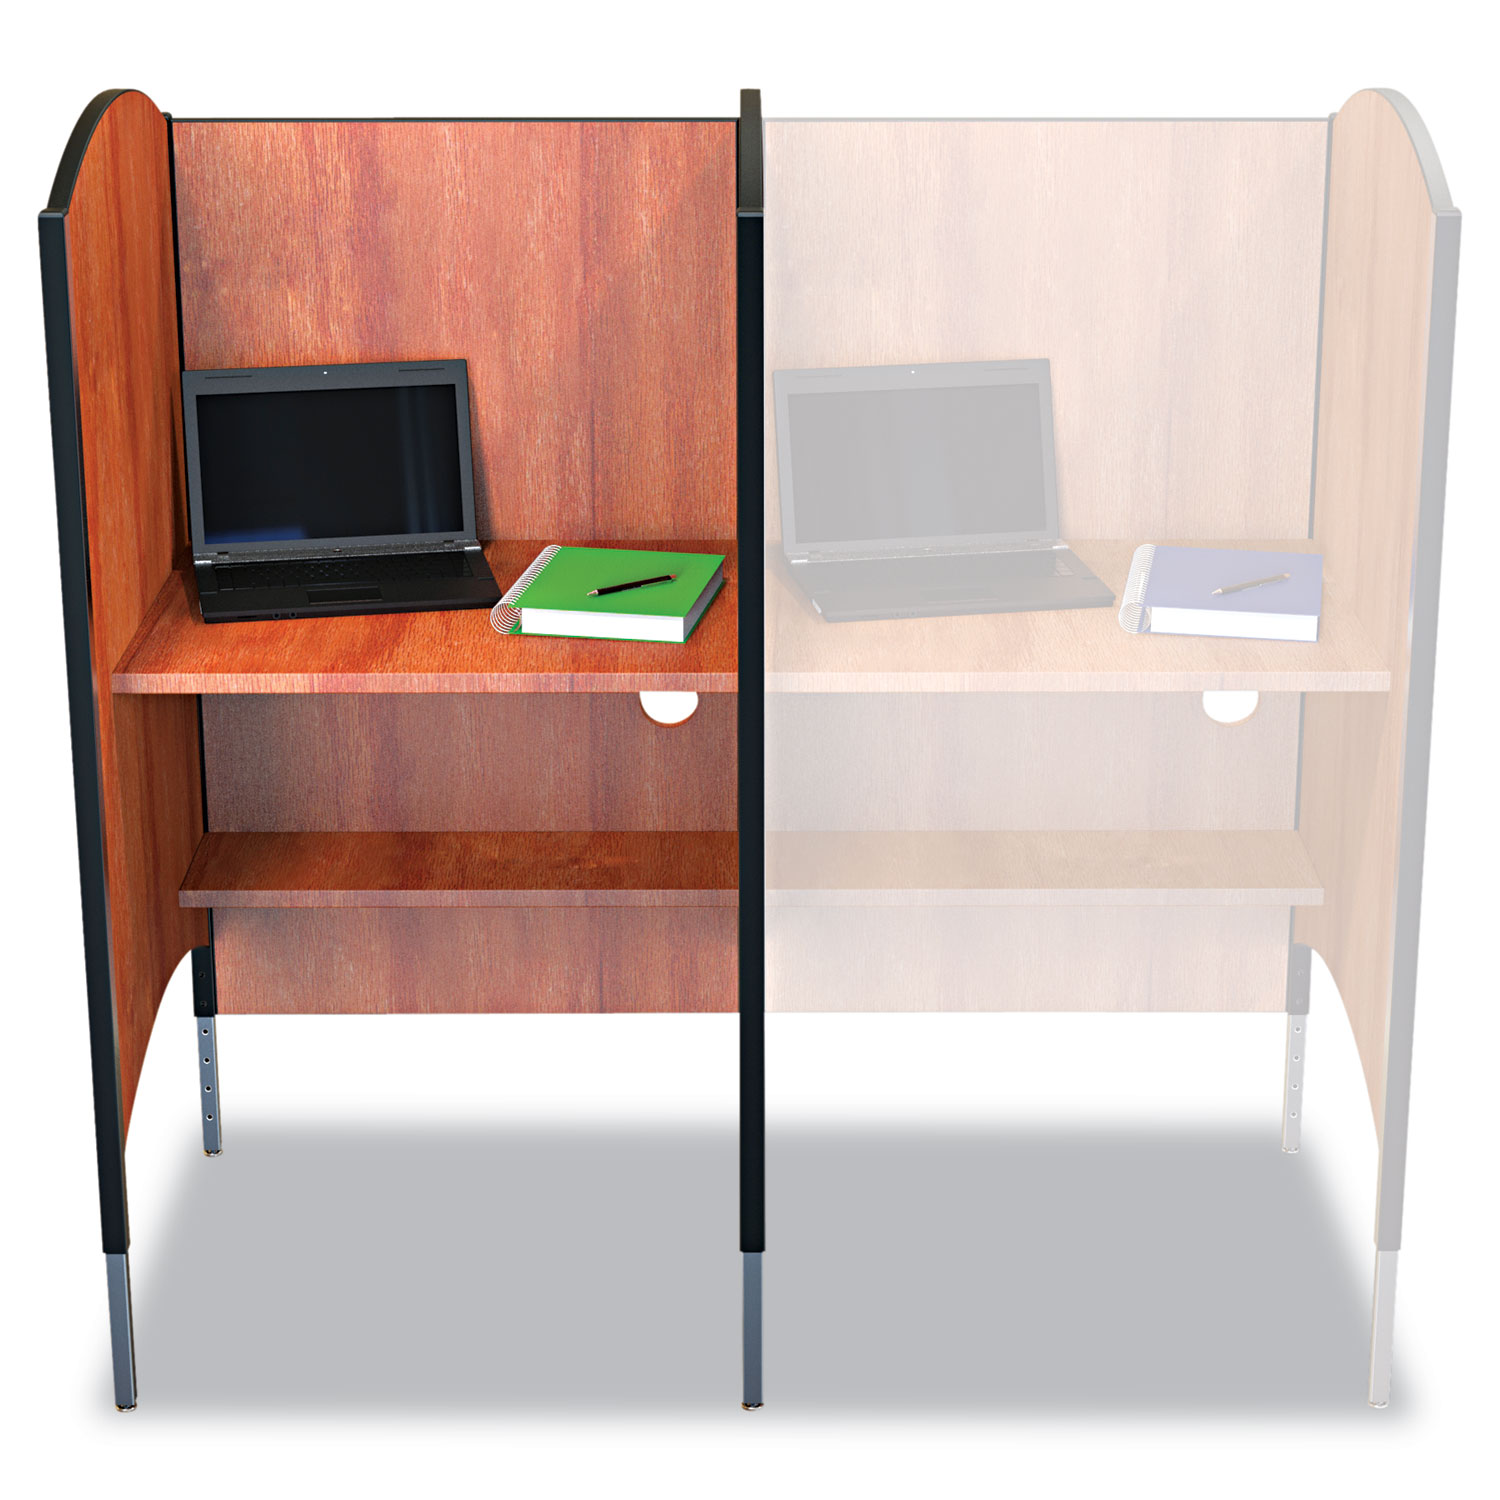 Height-Adjustable Carrel, Laminate, 31w x 30d x 57-1/2 to 69-1/2h, Cherry